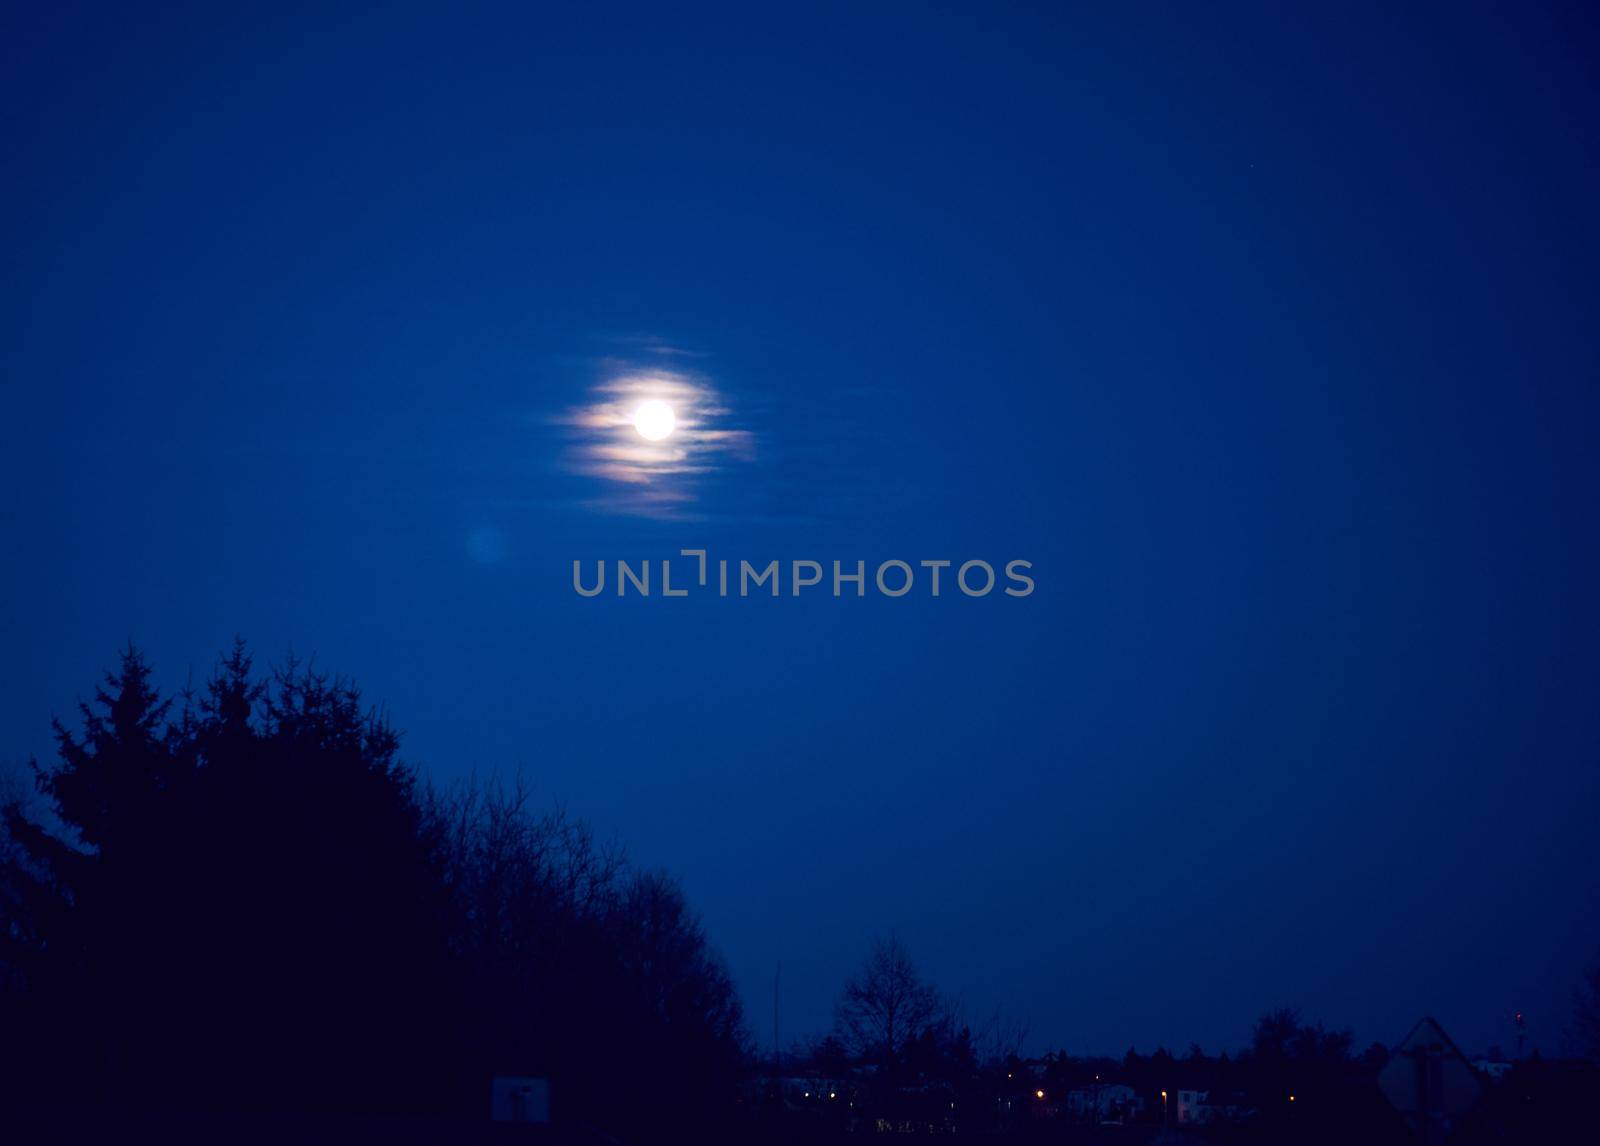 moon on night sky during blue hour